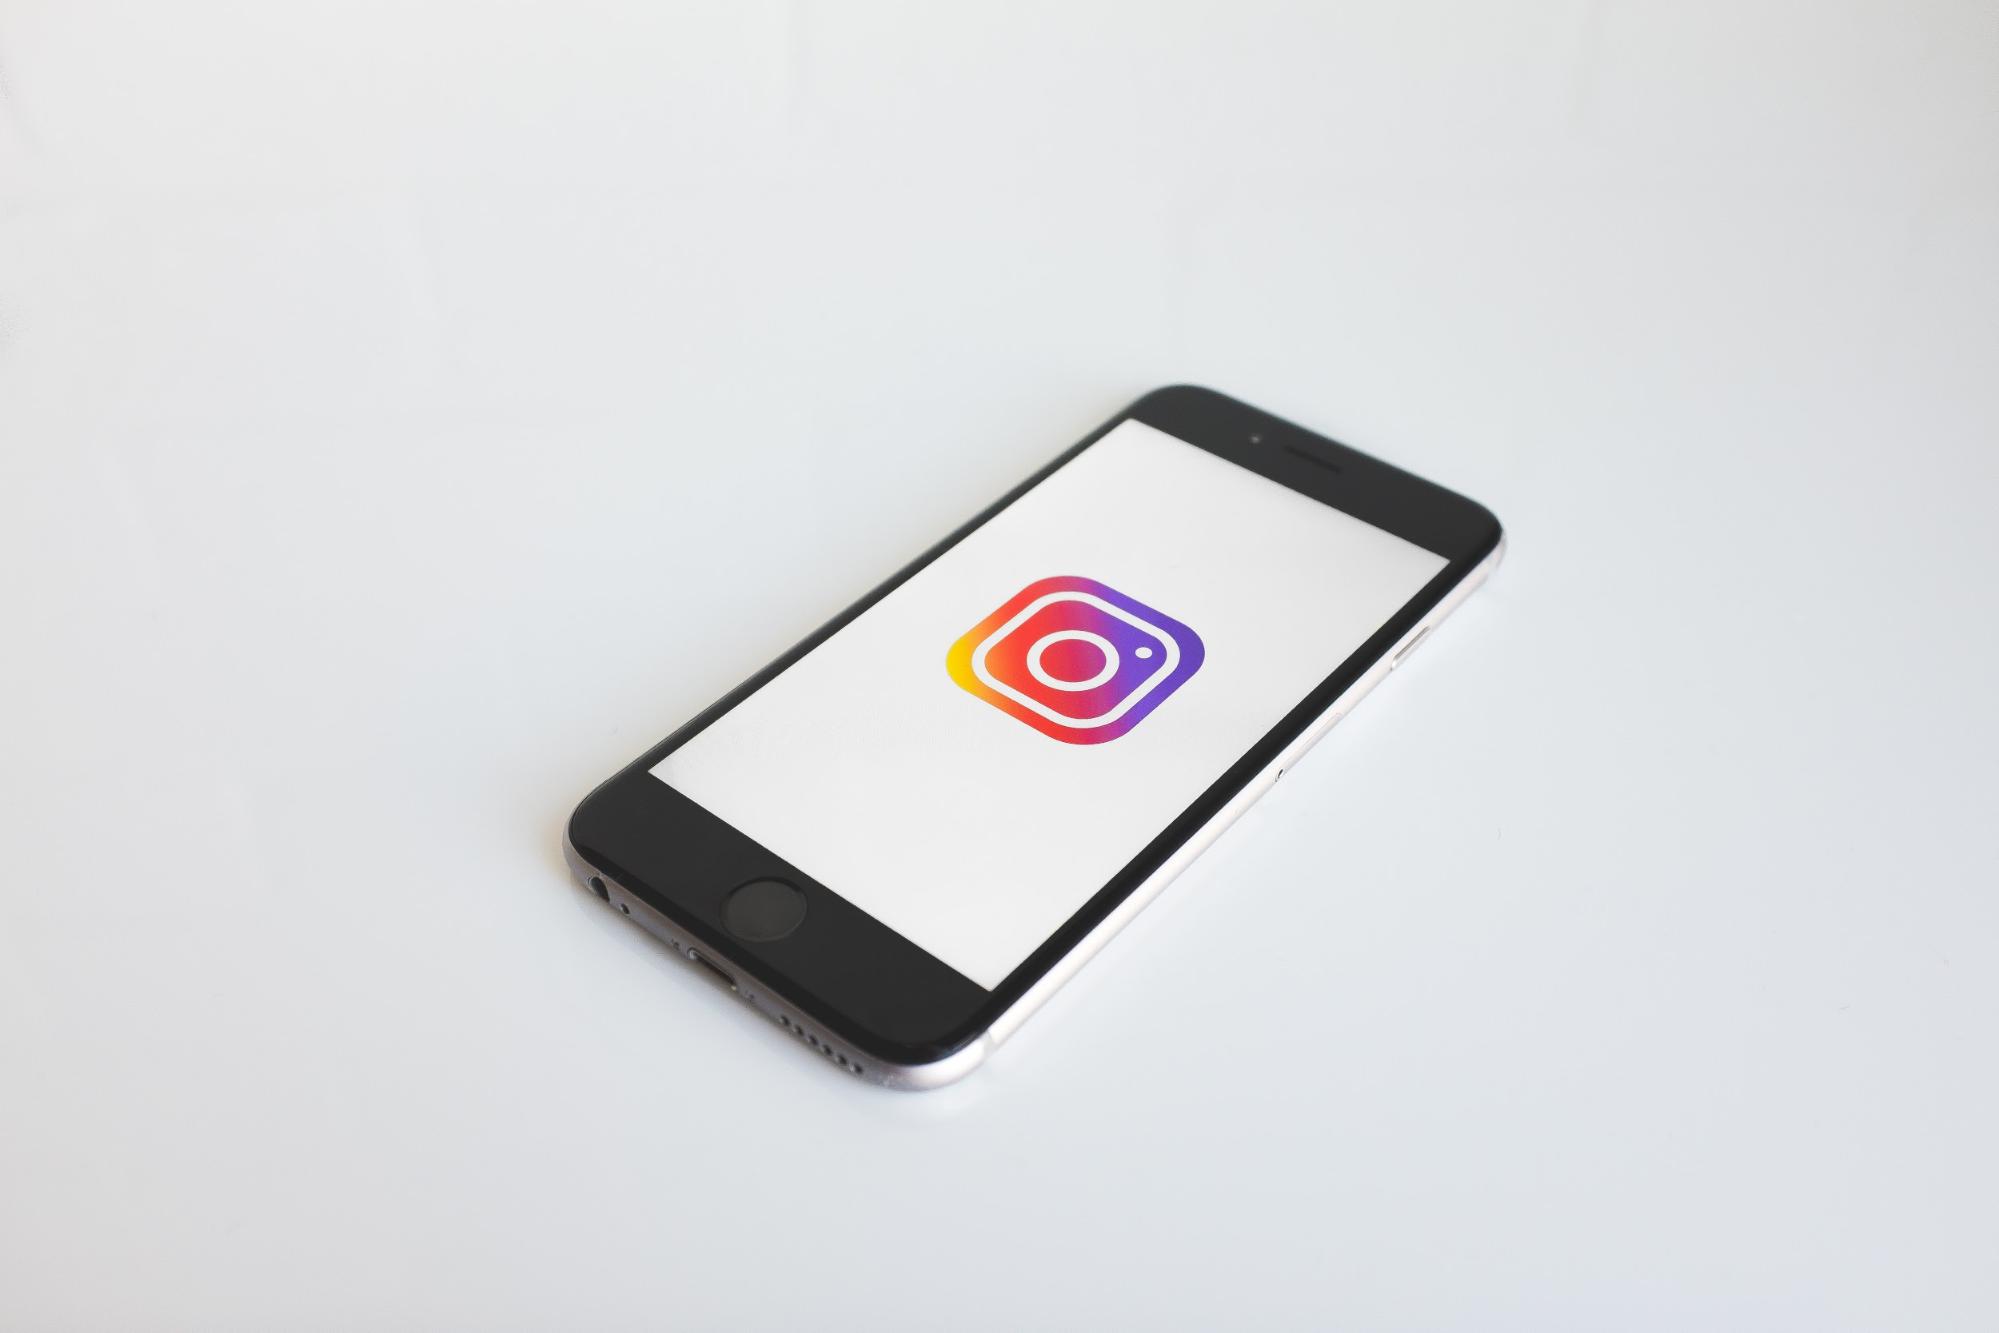 10 Steps To Market Your Business On Instagram